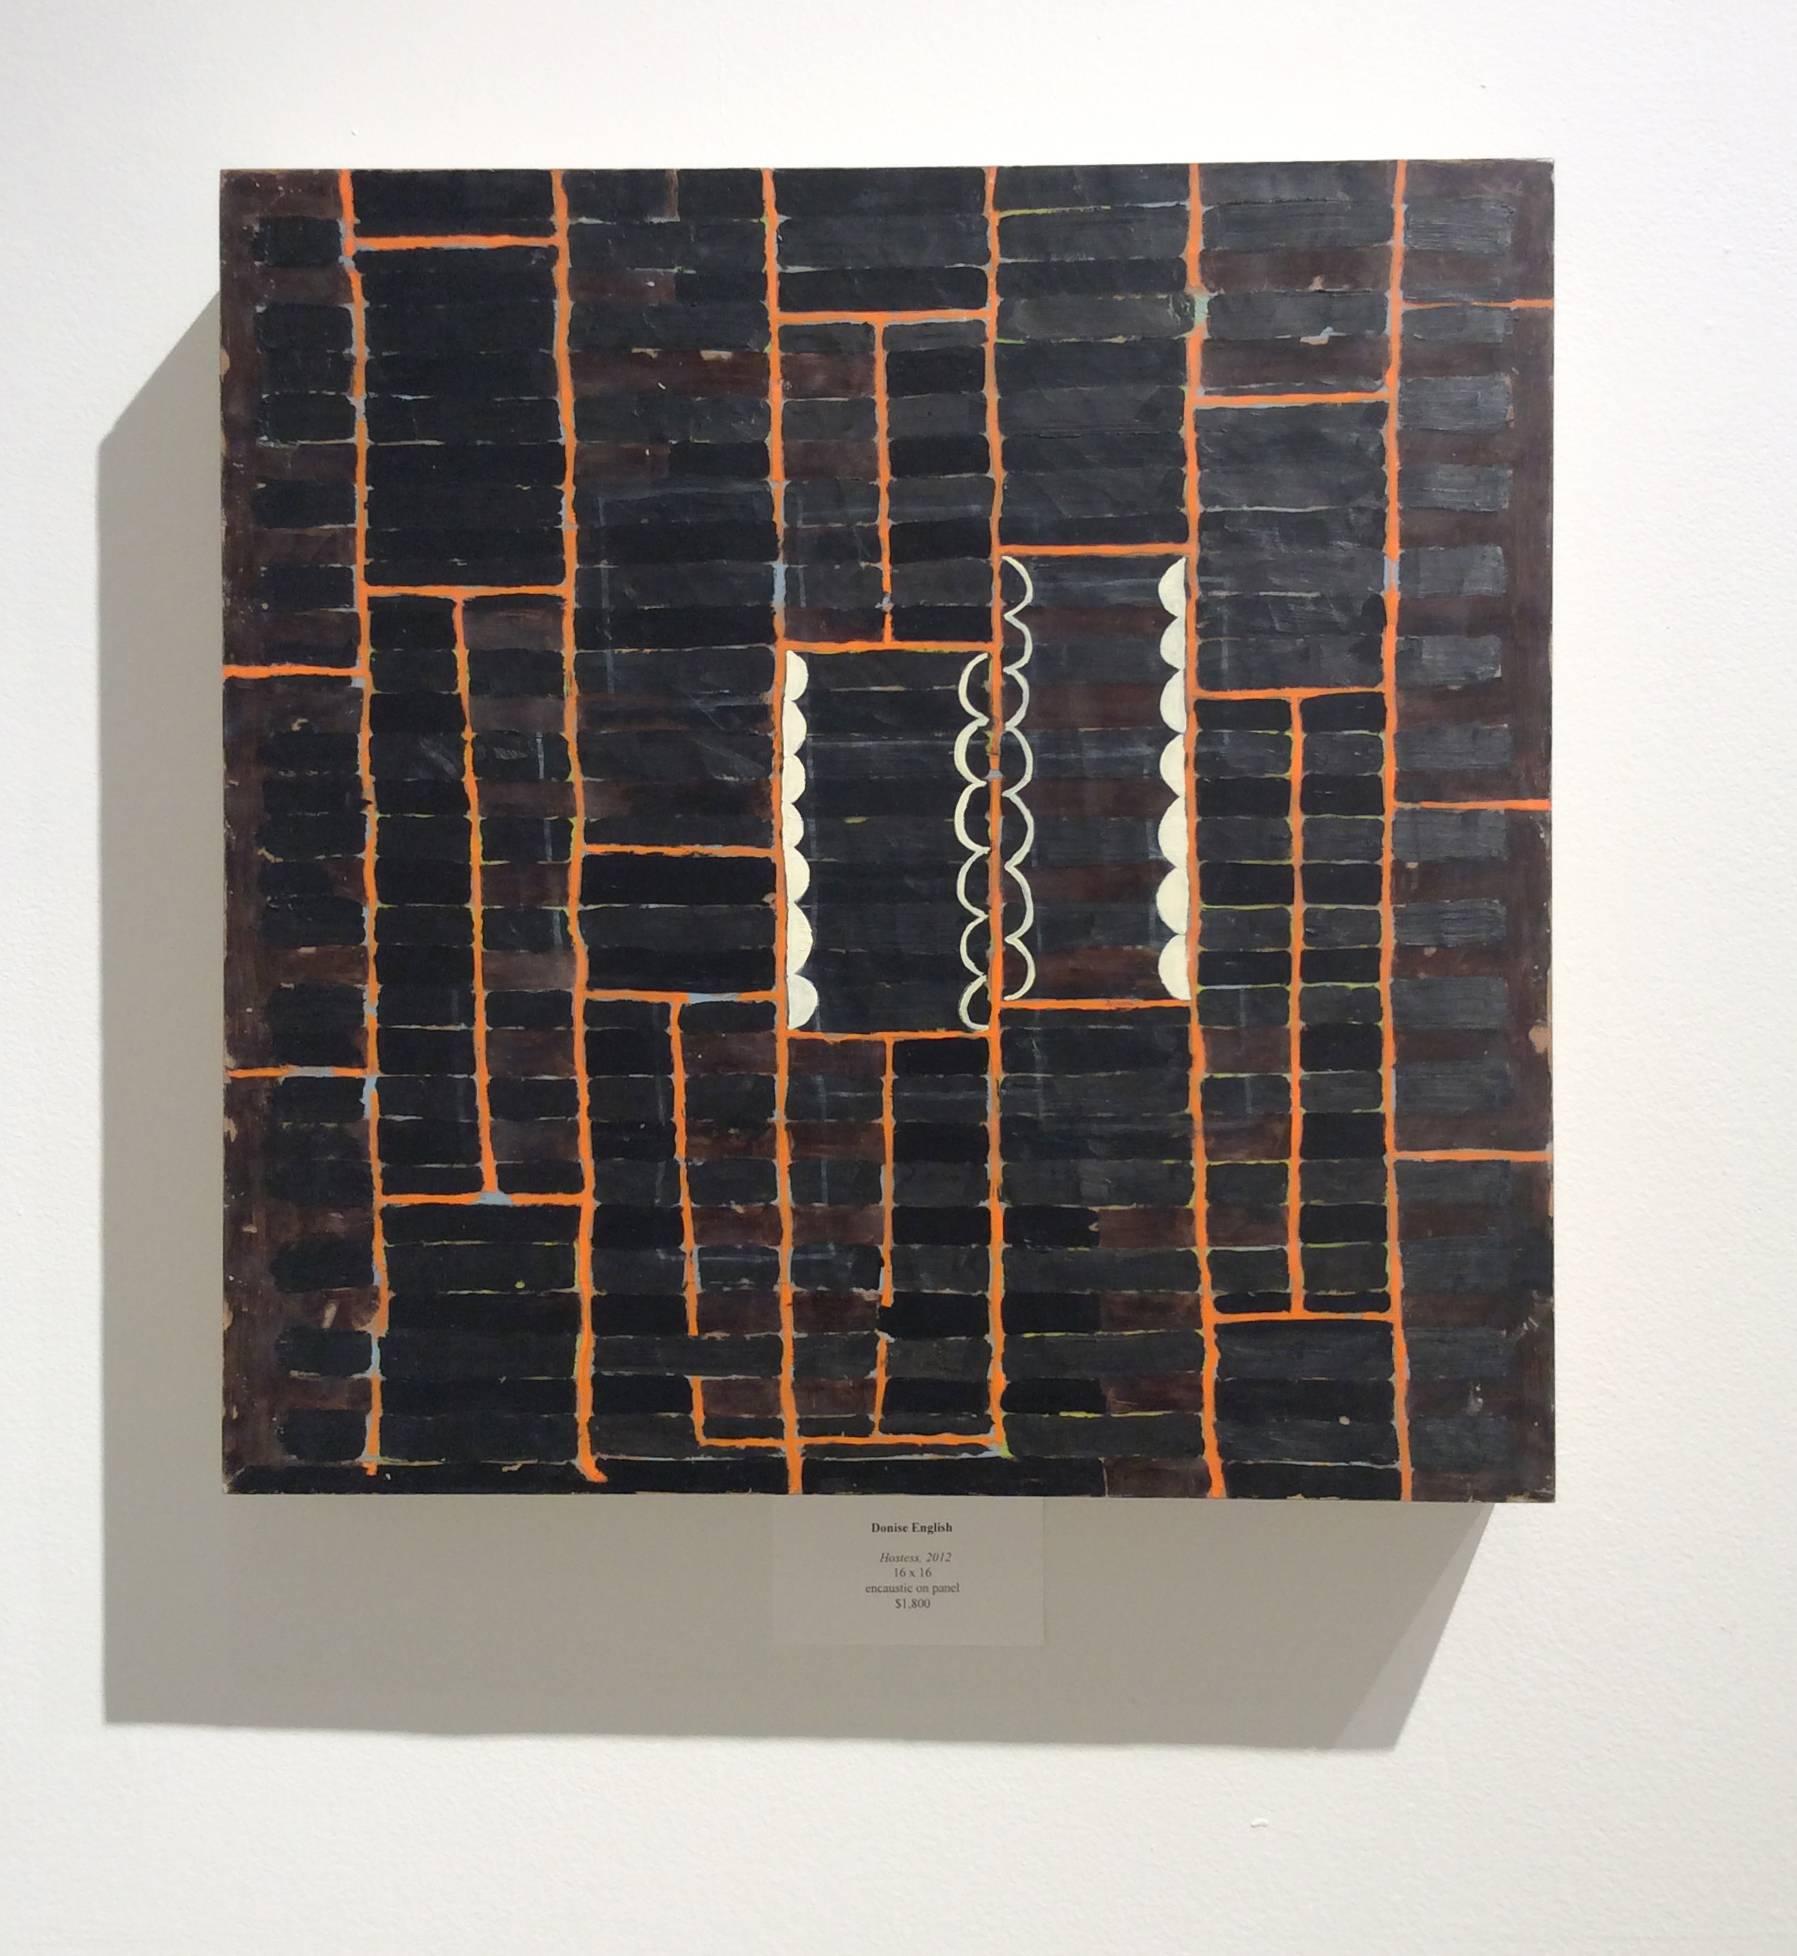 16 x 16 x 2 inches
encaustic on square wood panel

HOSTESS is an abstracted painting in rich encaustic (pigmented wax) on wood panel.  A dark, cross-hatched pattern is overlaid with a bright orange grid.  Donise English is well known for her quirky